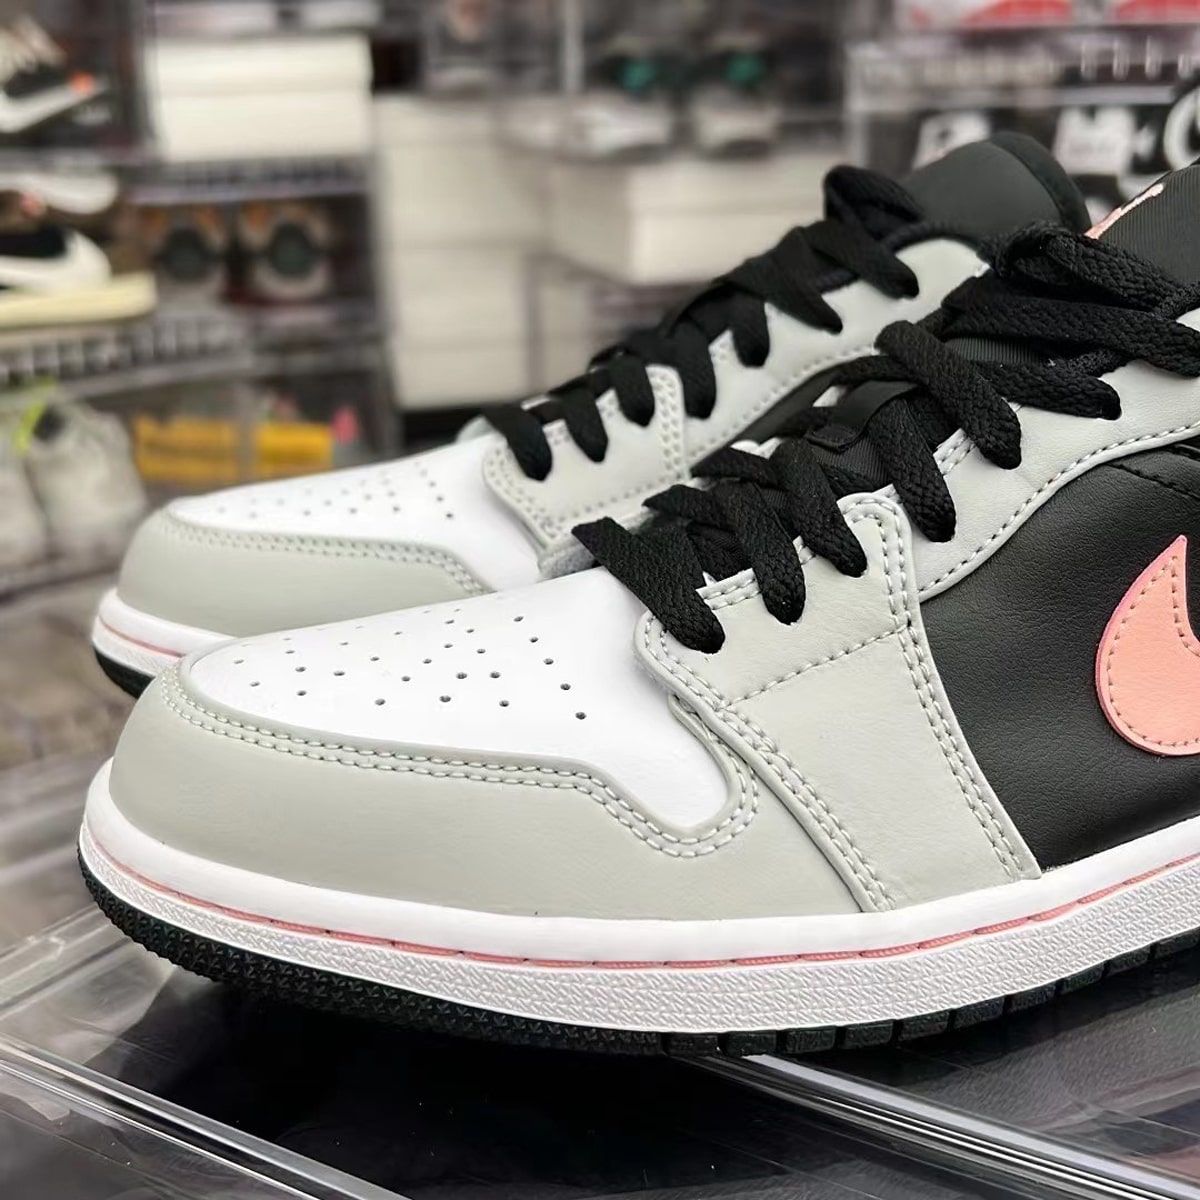 First low 1s Looks // Air Jordan 1 Low "Canvas" | HOUSE OF HEAT